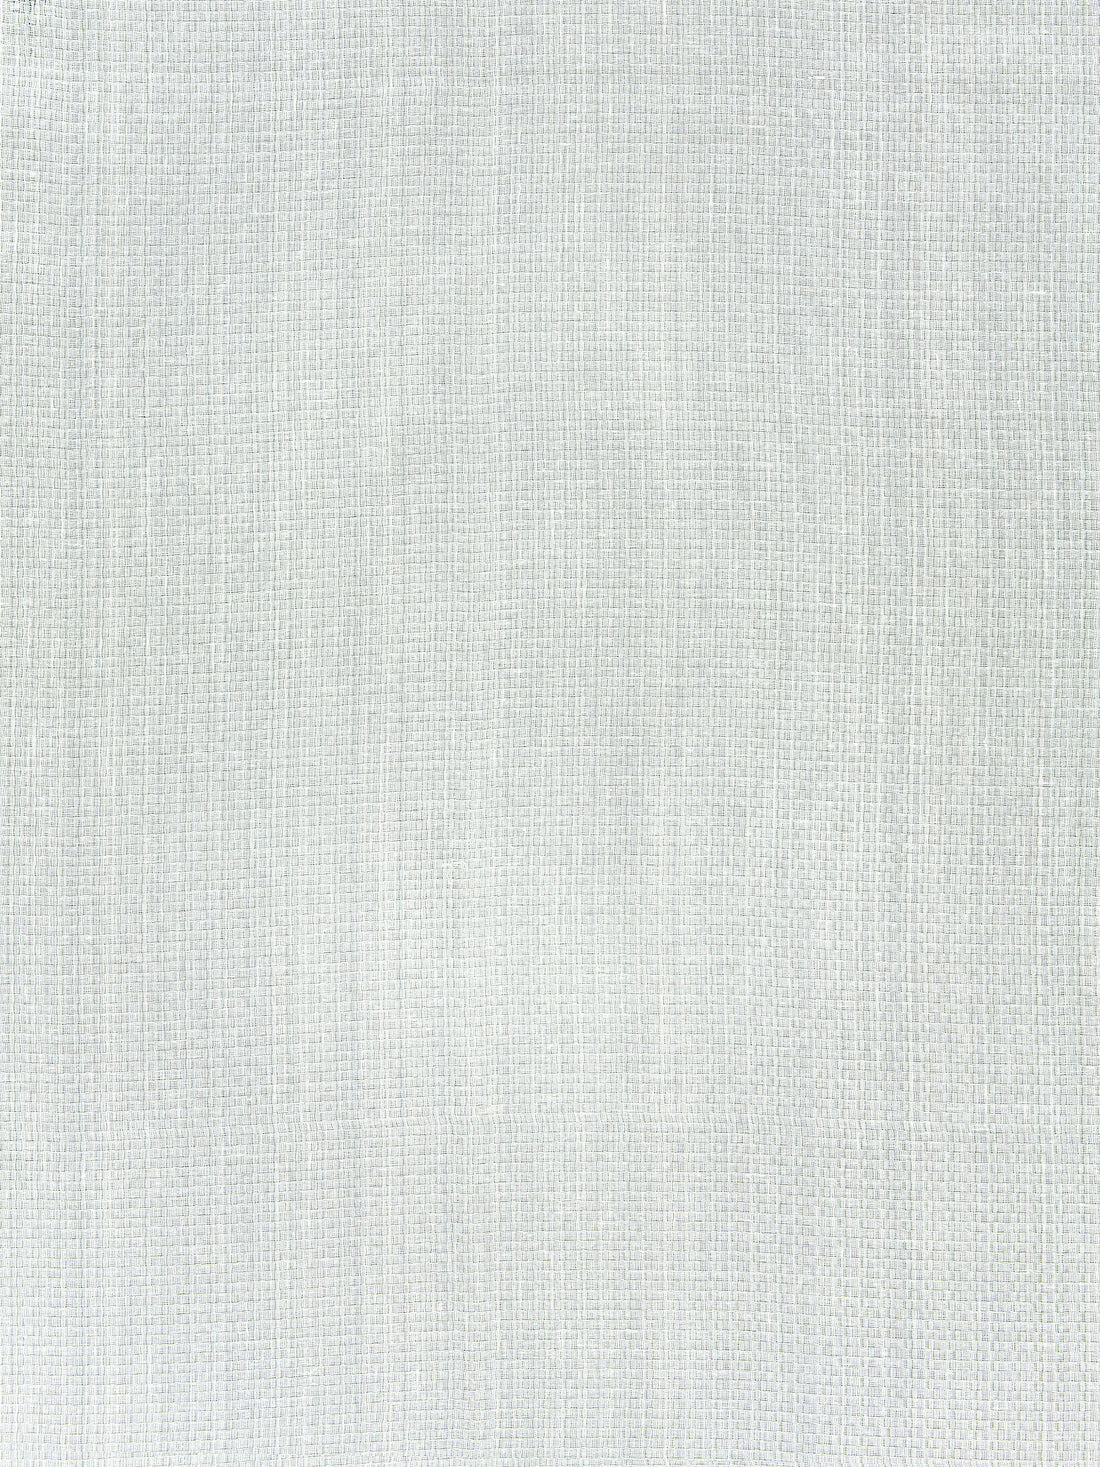 Sora Sheer fabric in pale sky color - pattern number SC 000327236 - by Scalamandre in the Scalamandre Fabrics Book 1 collection